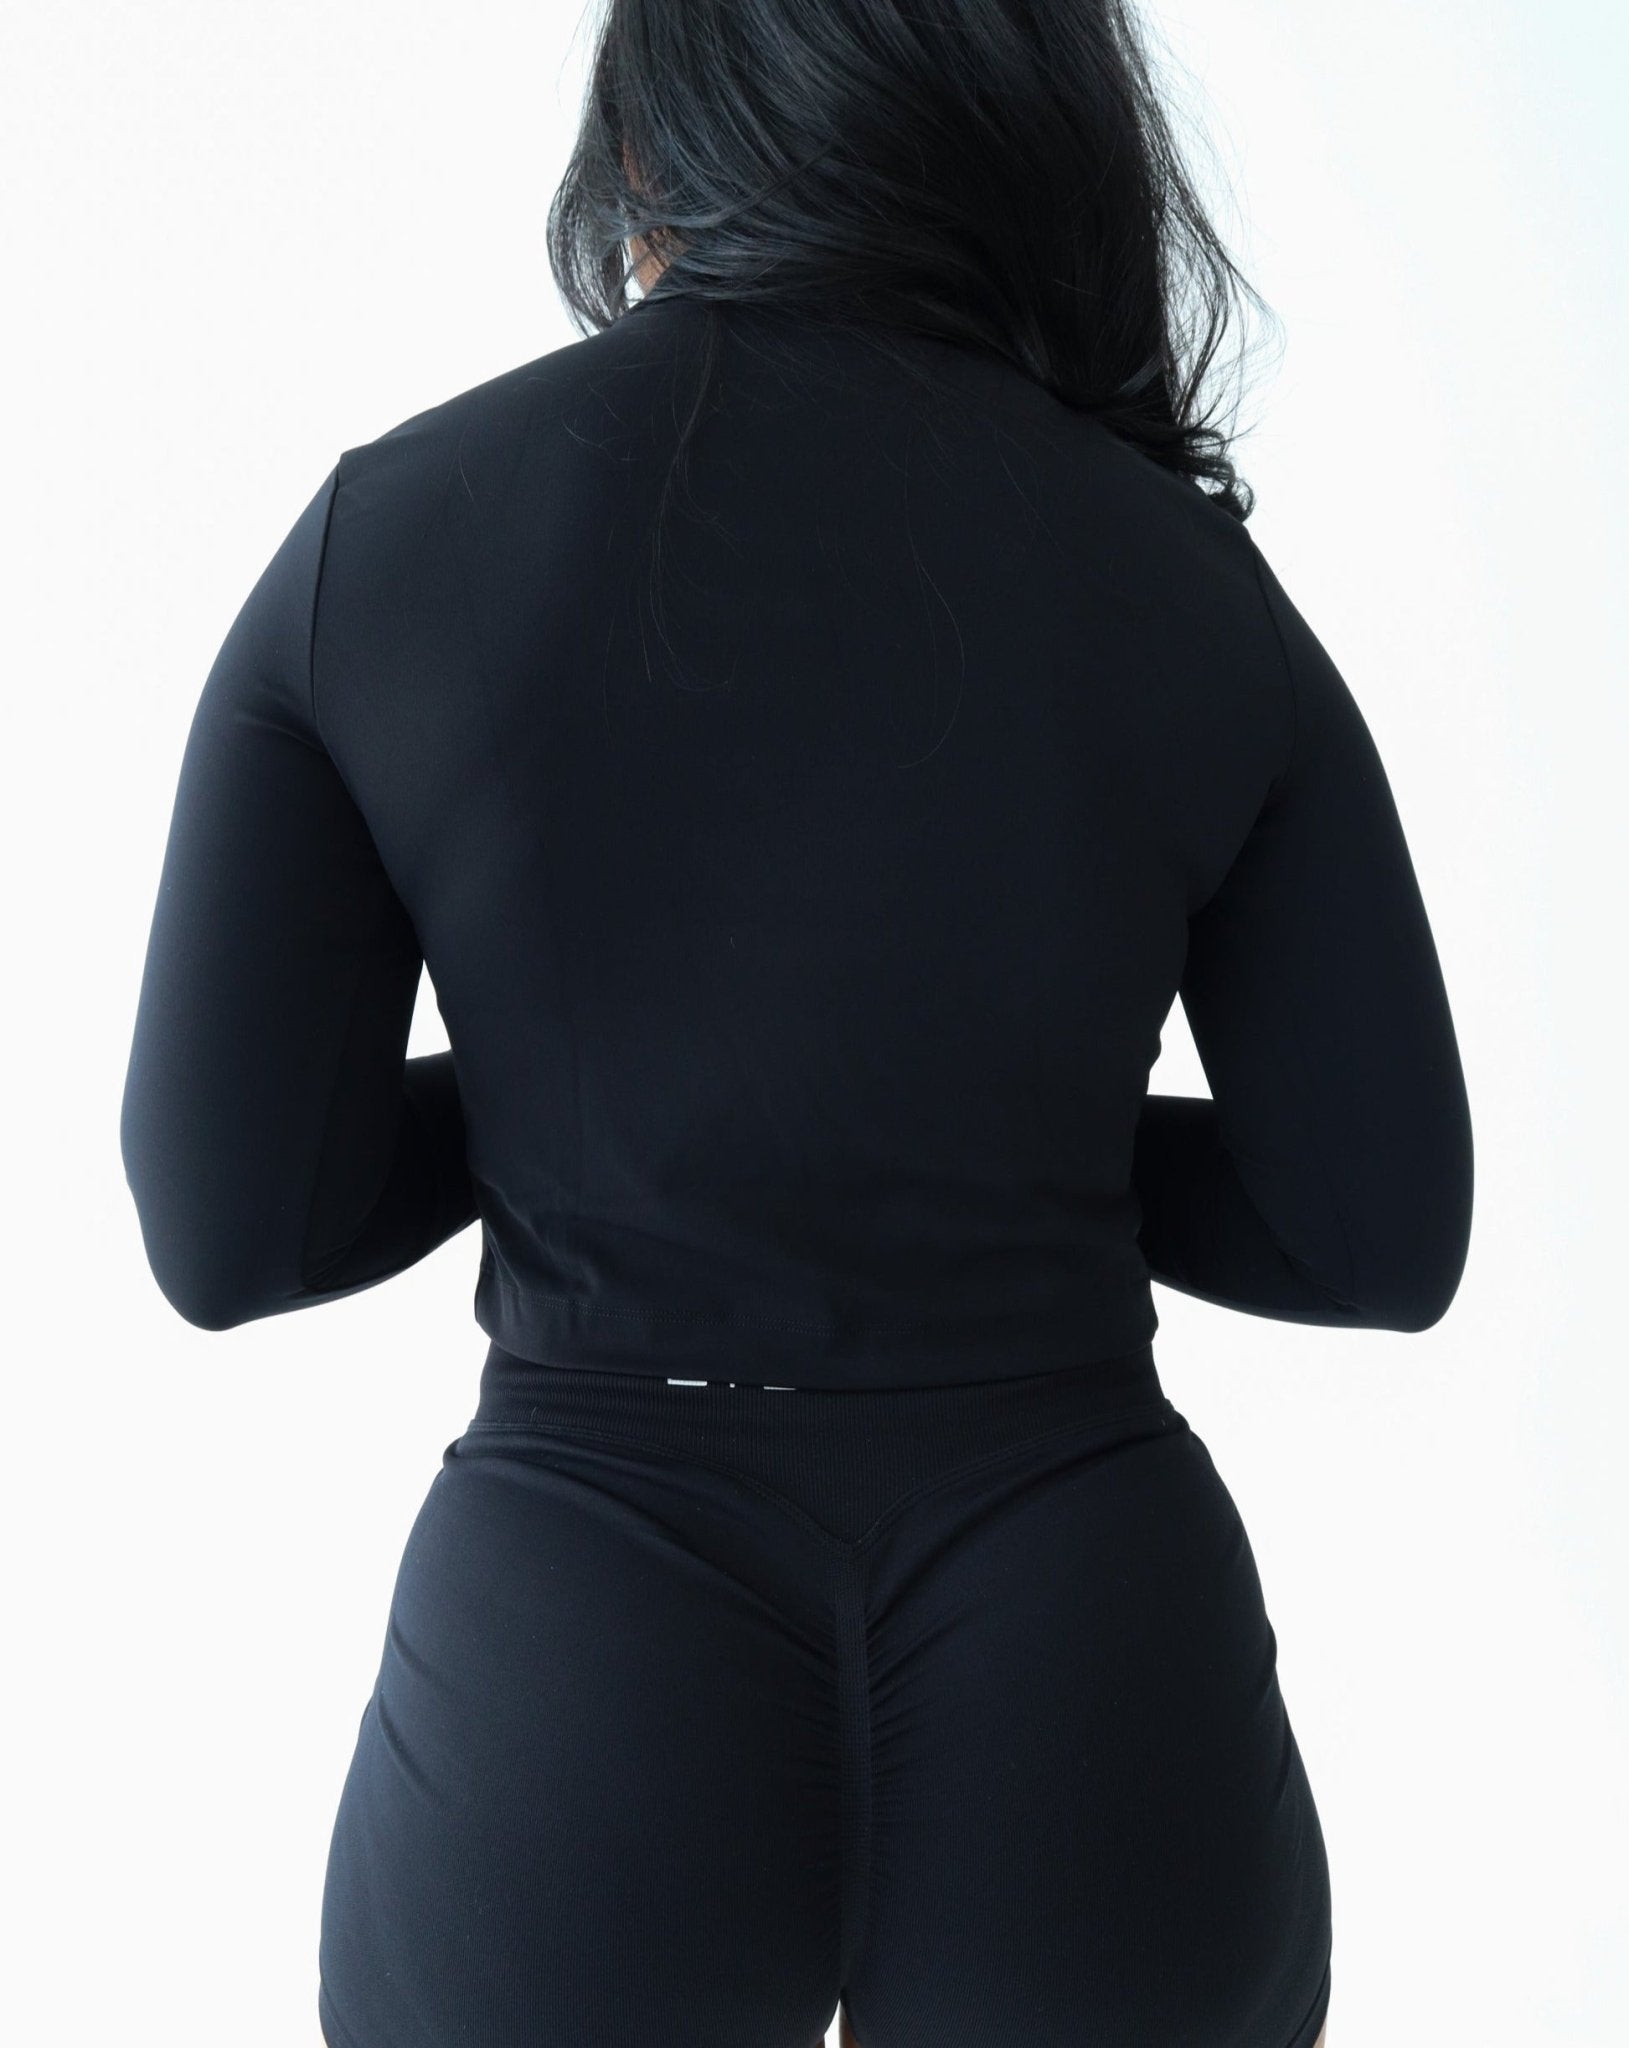 REFINE Cropped Training Jacket - BLACK - LIBERA Fitness Apparel. Stay stylish and comfortable during workouts with our REFINE Cropped Training Jacket. Perfect for outdoor sessions.